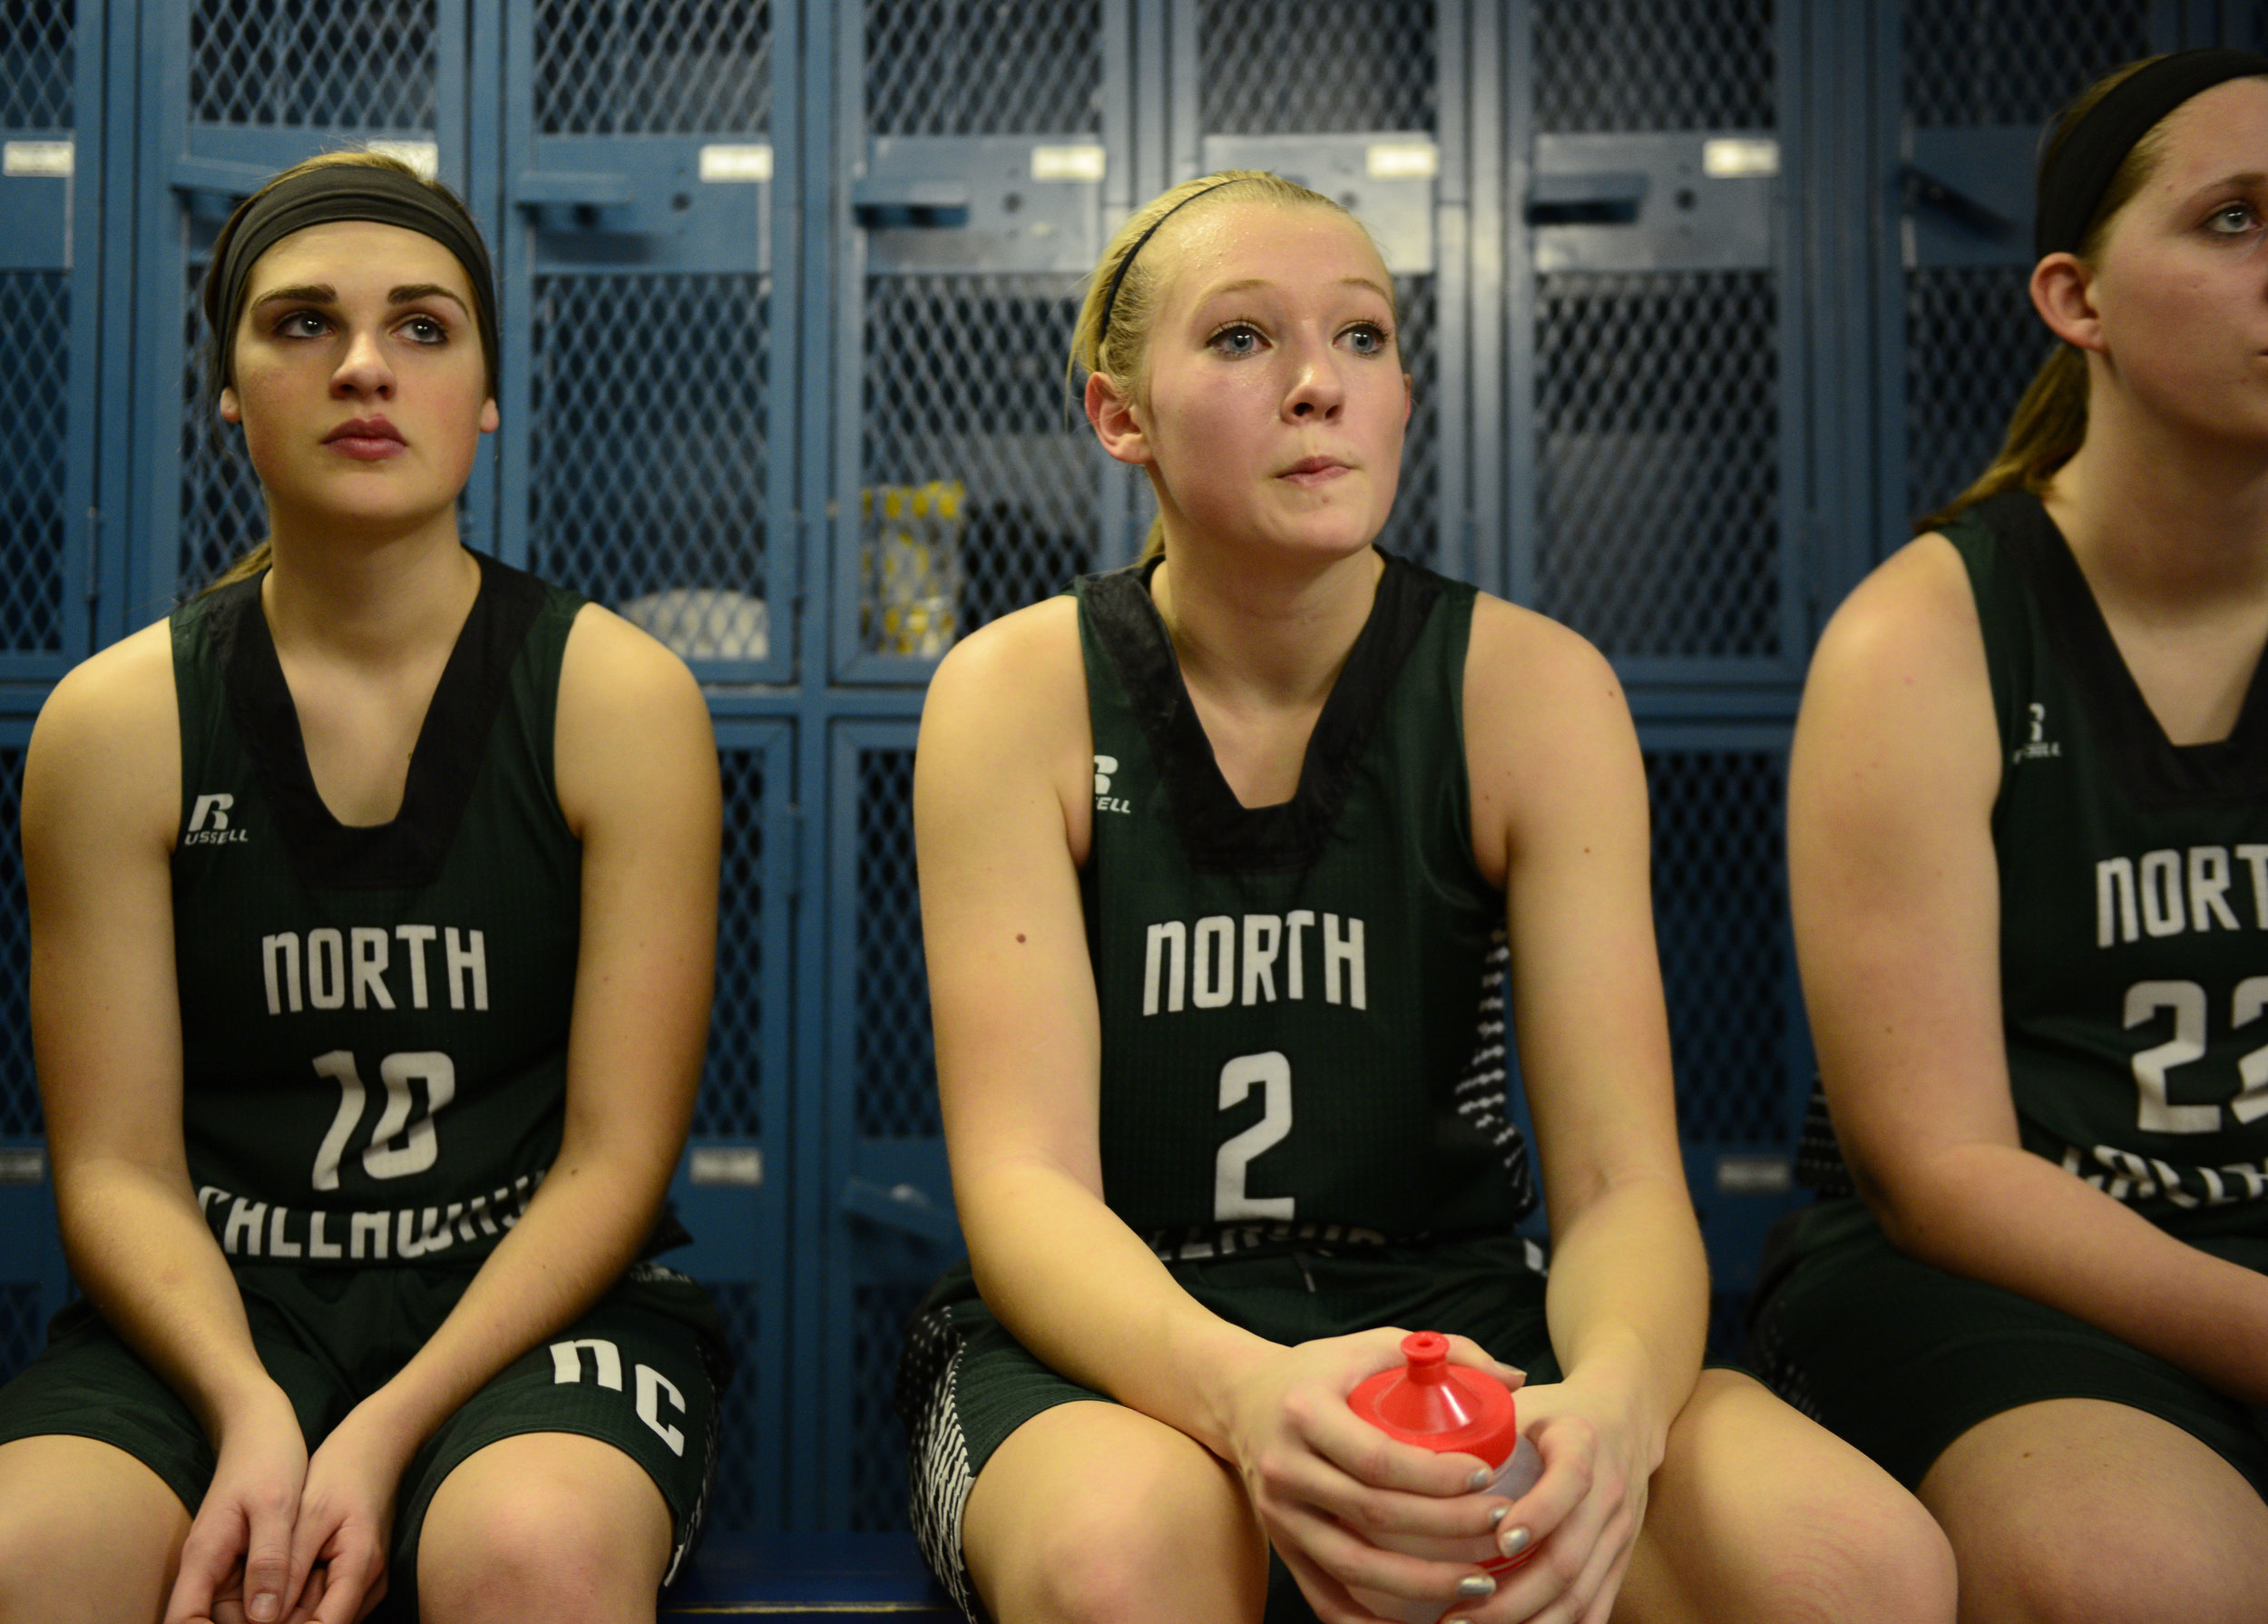  After a neck-and-neck first half, freshman Mackenzie Ausfahl sits flanked by Skylar Schmauch and Taylor Wiseman as Coach Mathias Miller gives the team some stern words in Center, Missouri, on Feb. 16, 2016. Her sister, Madison, is a senior on the te